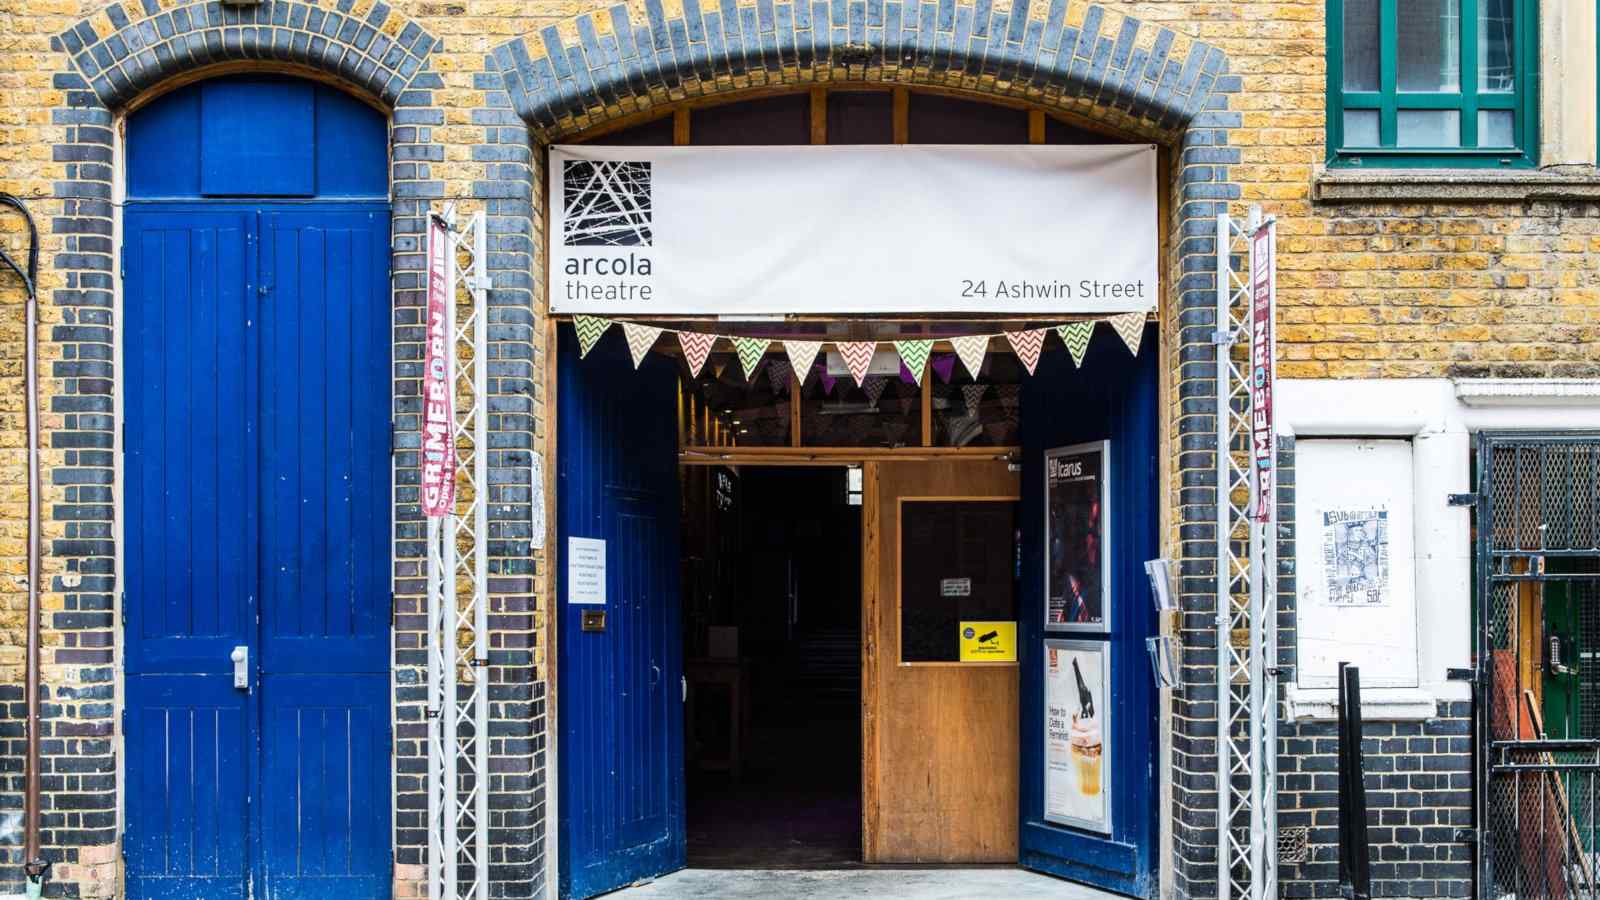 The entrance to the Arcola Theatre in London, with blue doors in a brick building.